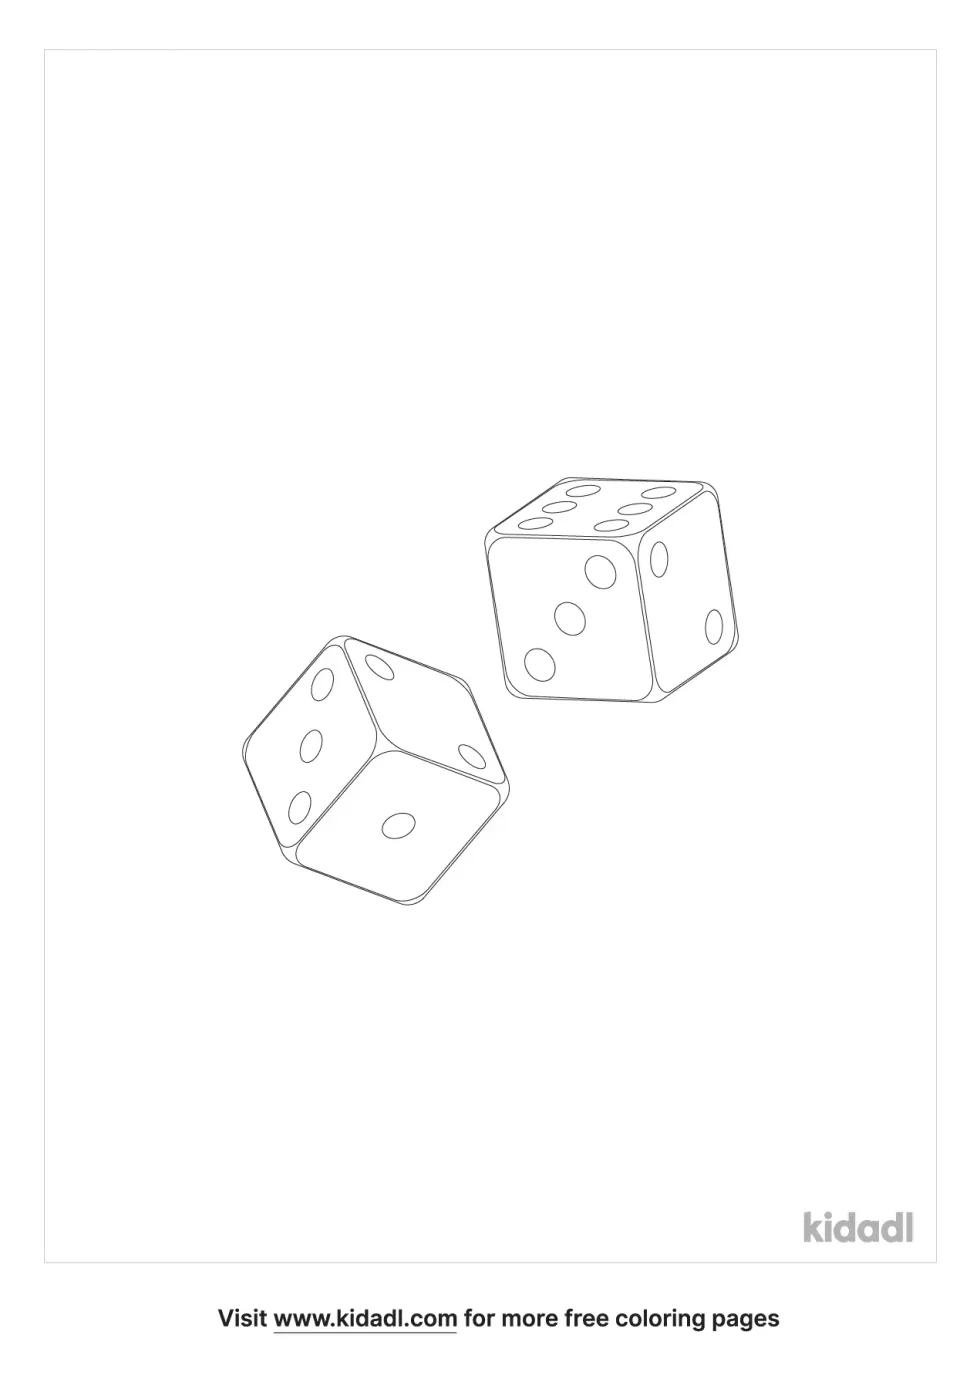 Throwing Dice